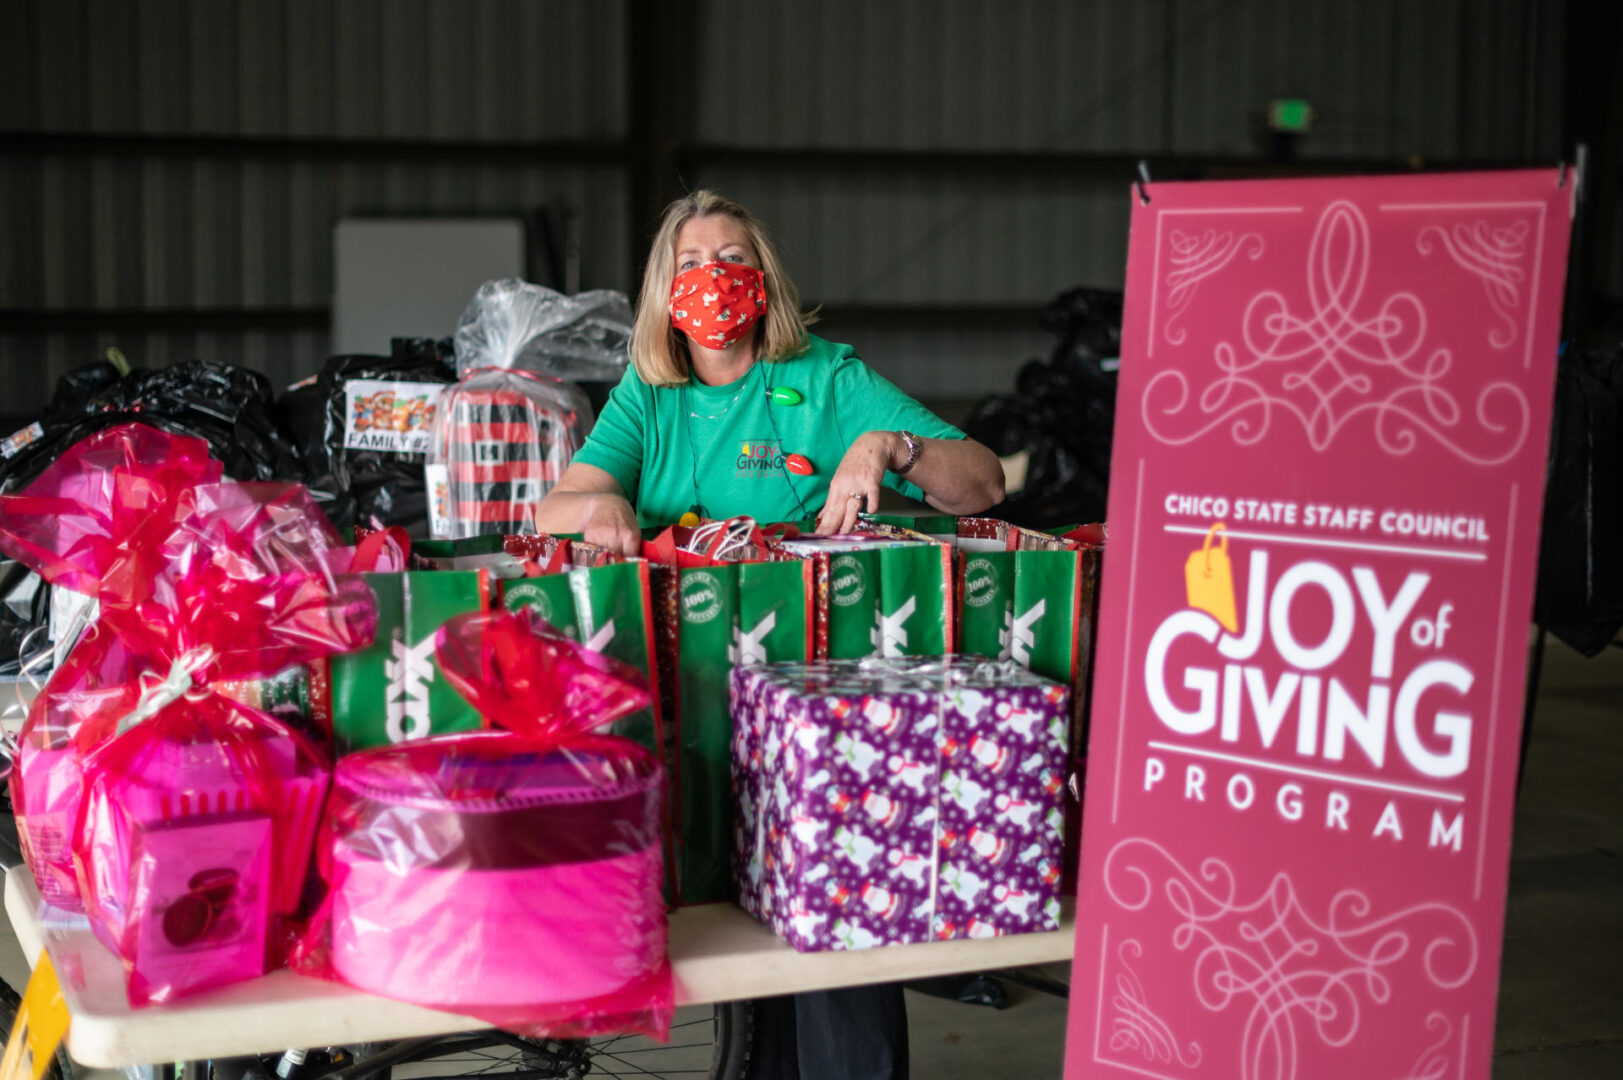 A woman wearing a green t-shirt and face mask stands behind a table full of presents with a large sign that reads, "Chico State Staff Council Joy of Giving Program" in front of the table. 